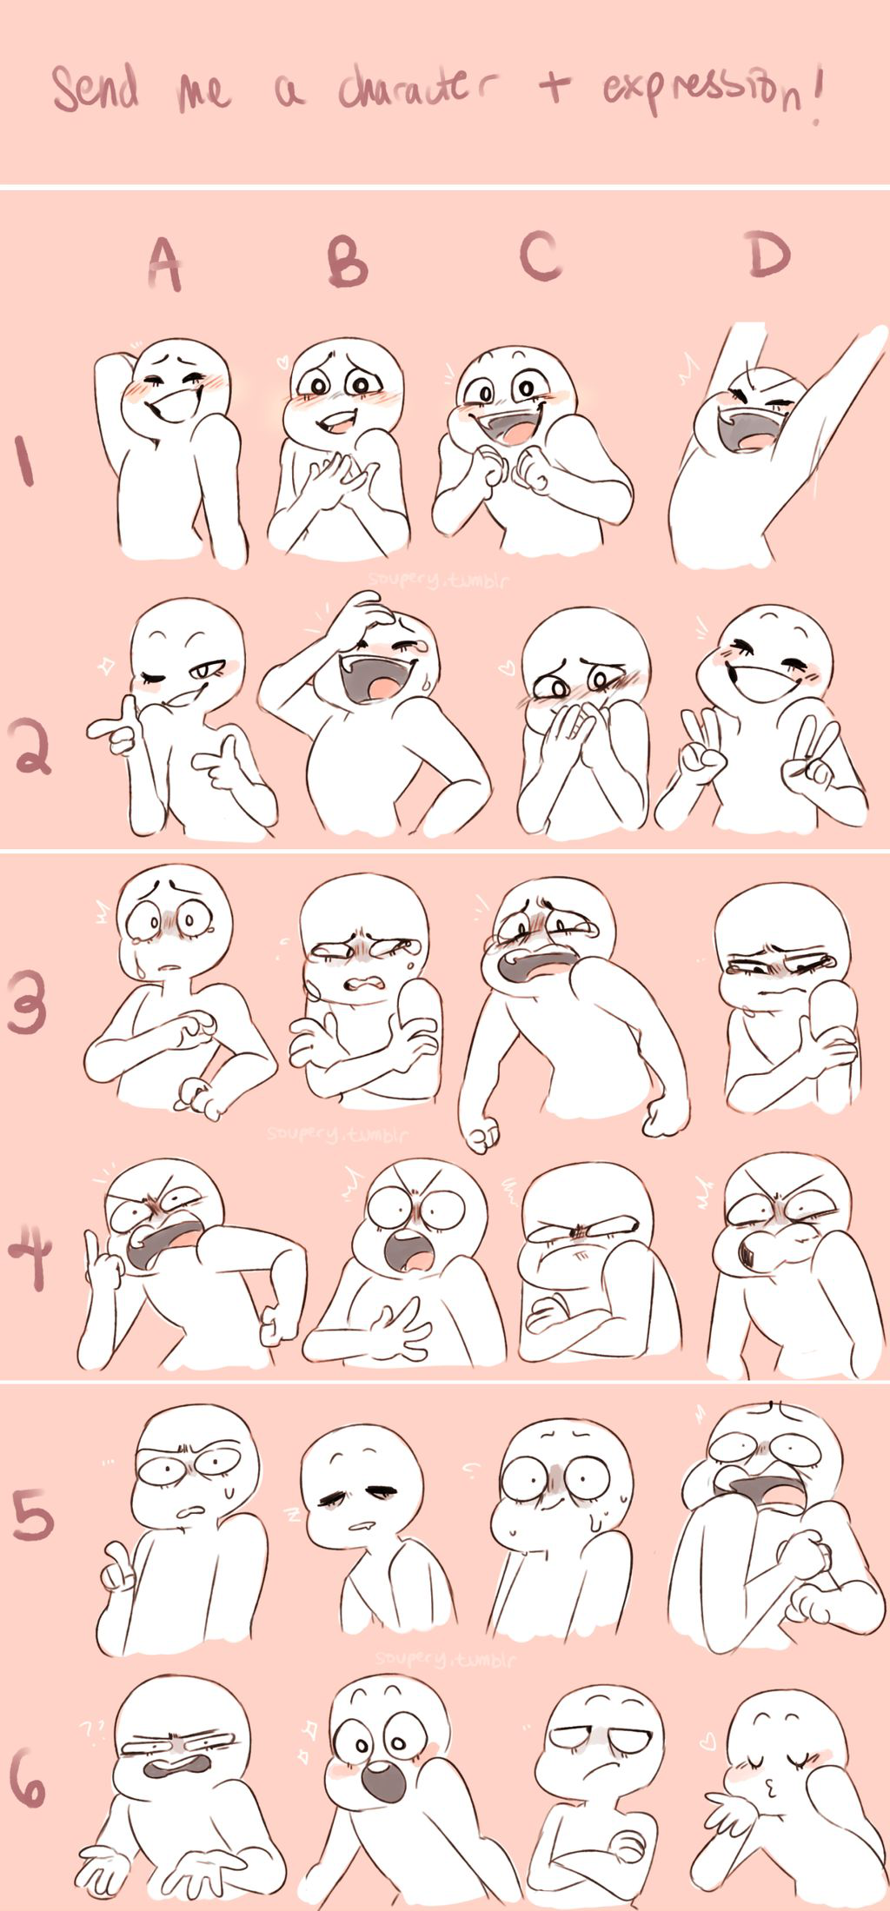     Hey all! So I found this online  I’ve always wanted to do one of those expression challenges ...